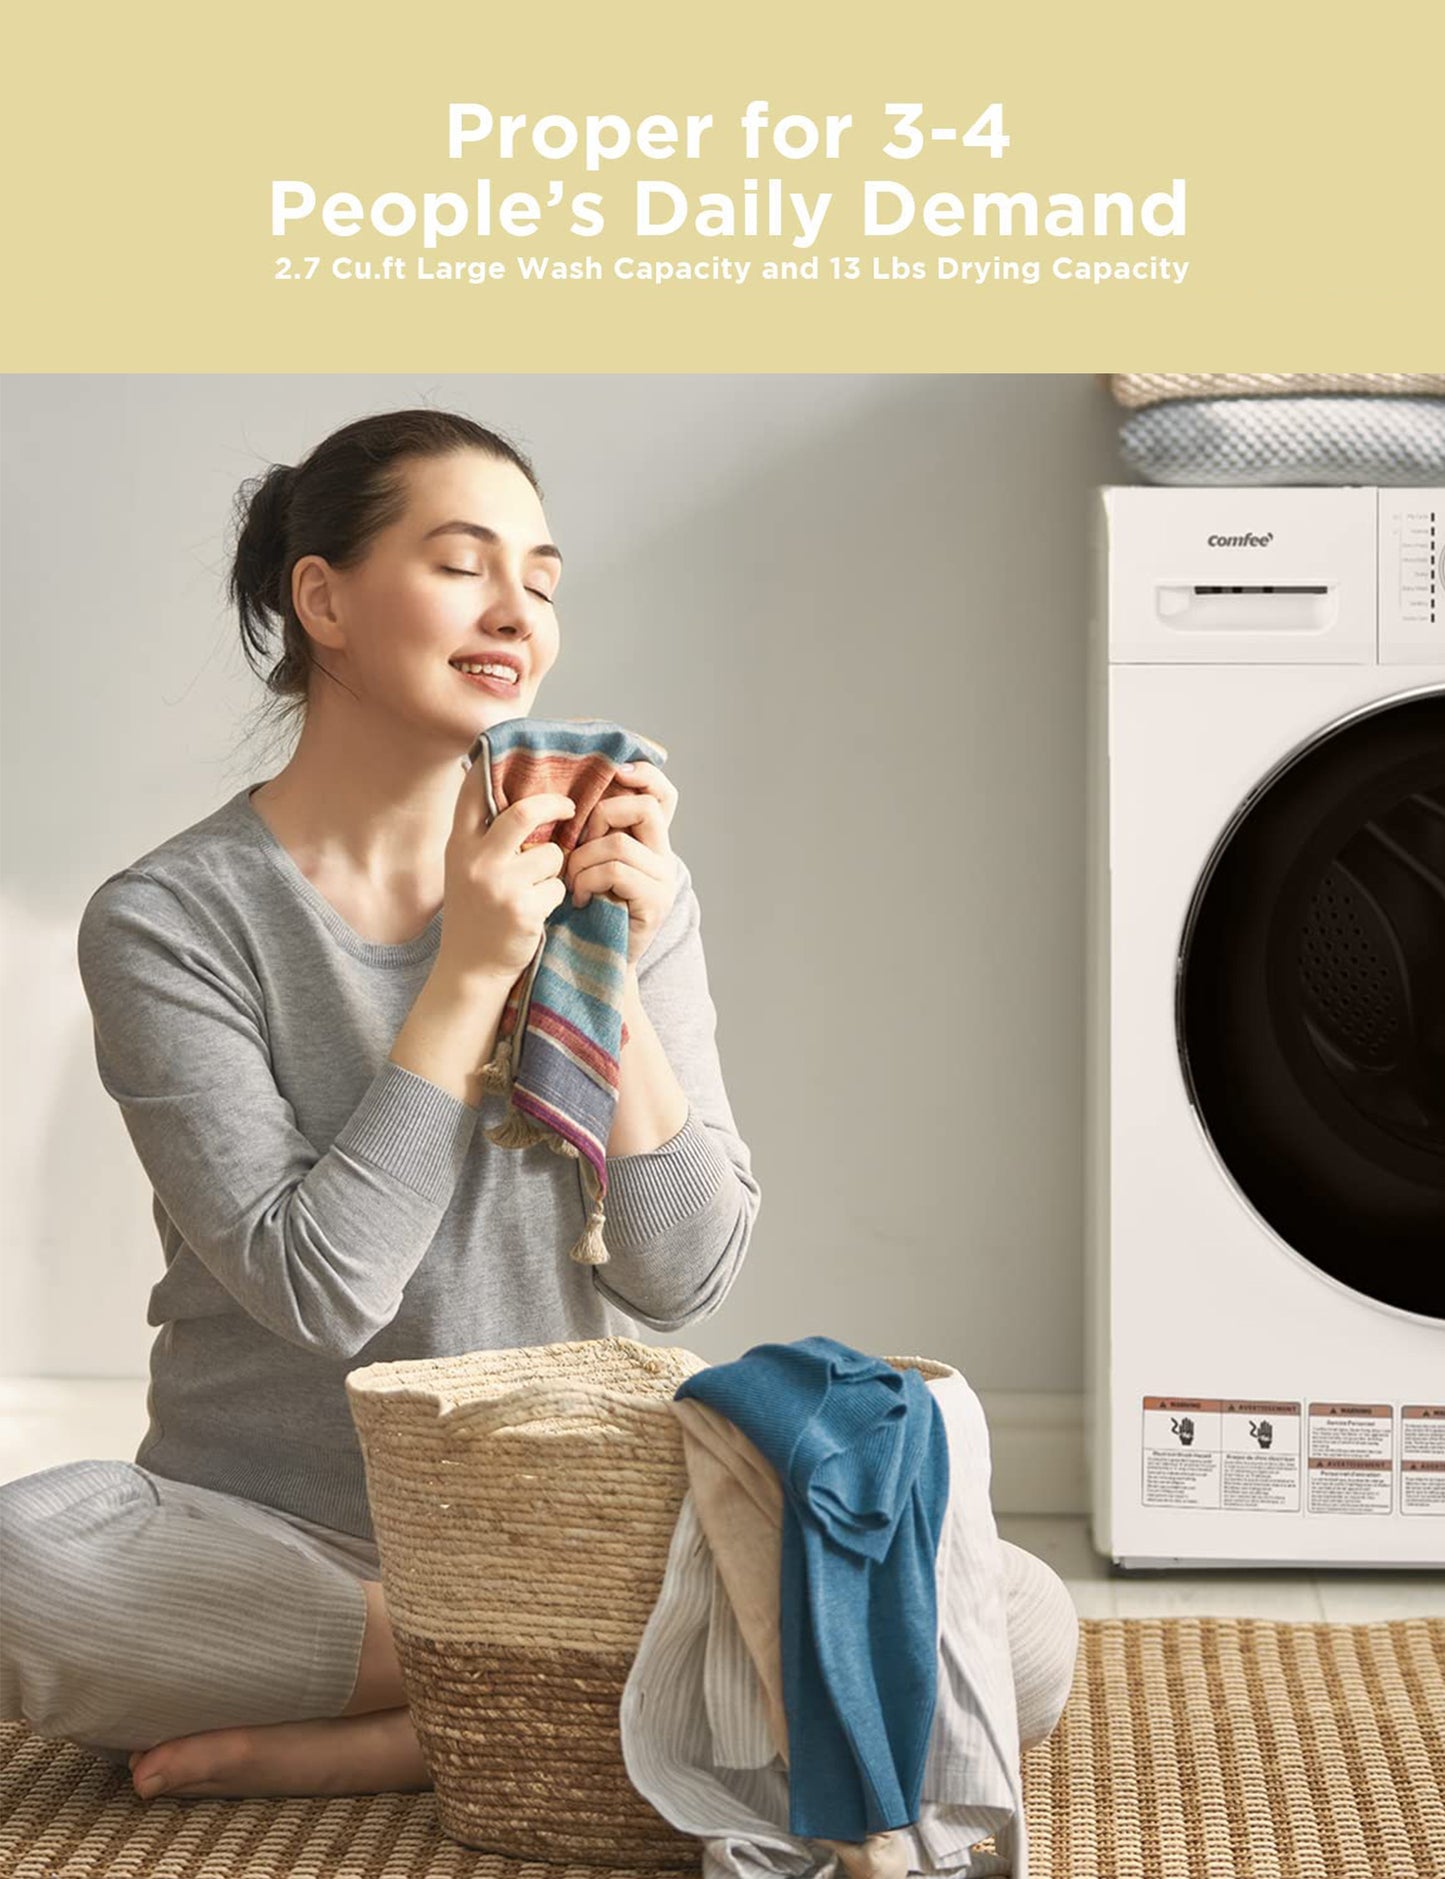 a woman closes her eyes to feel the smell of clothes with a washer and dryer combo next to her